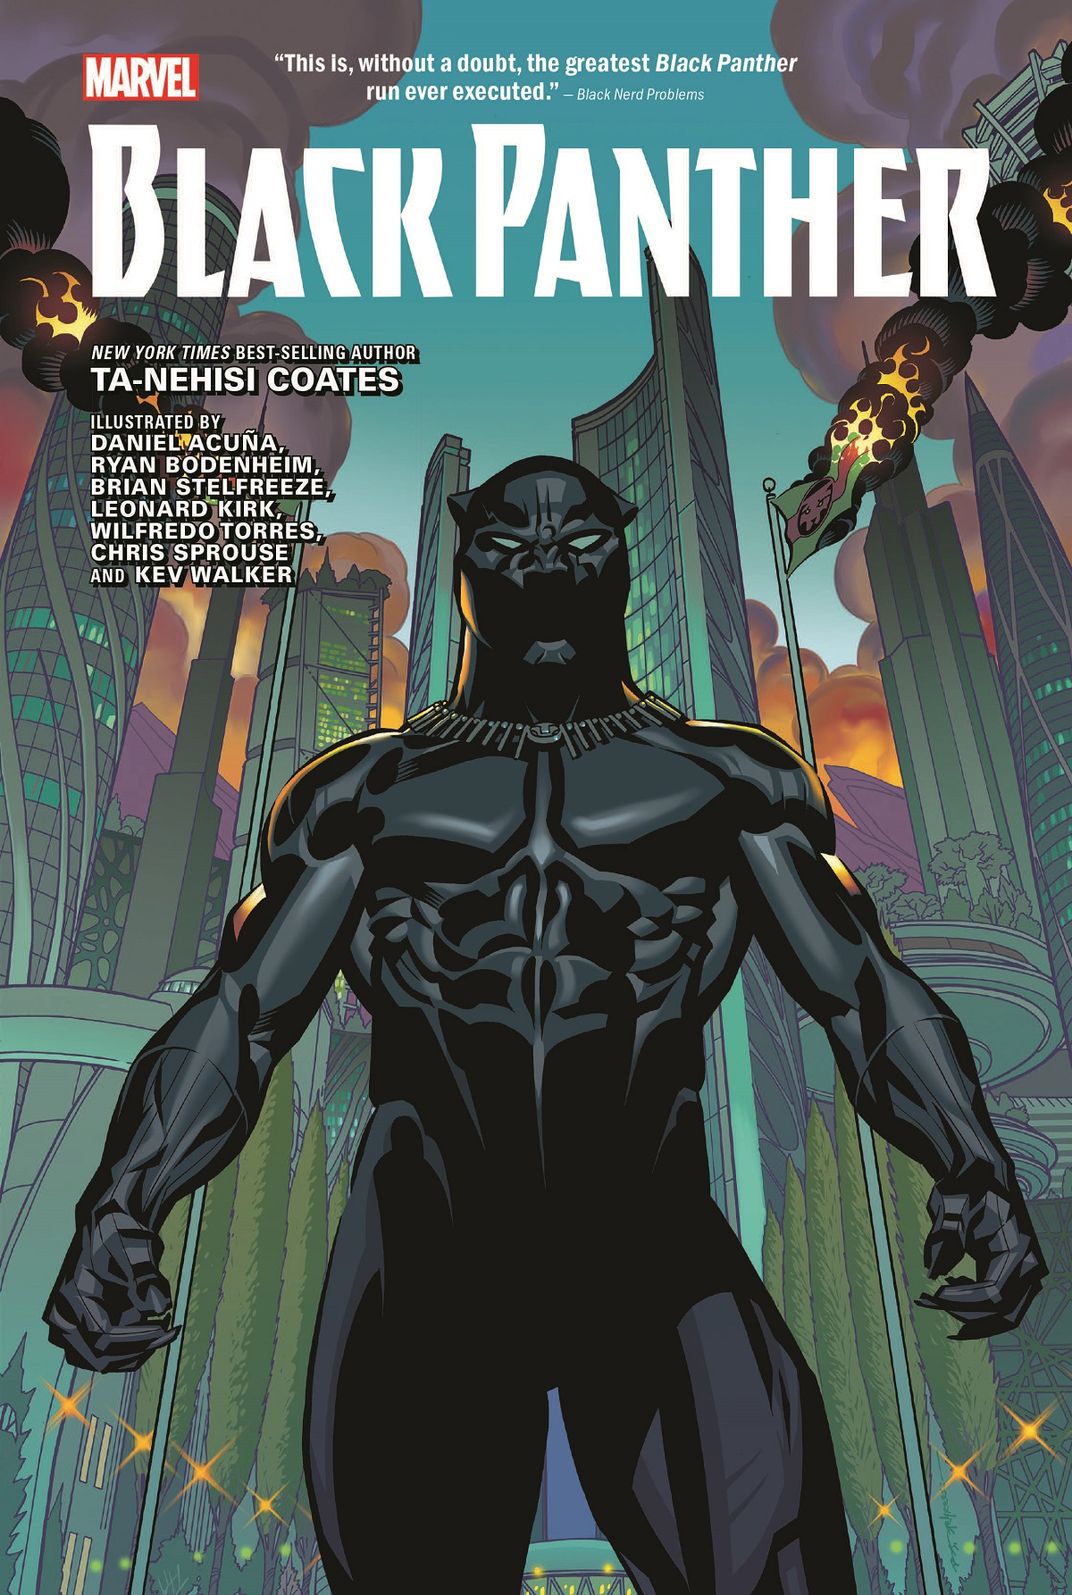 A Black Panther comic by Ta-Nehisi Coates, acclaimed writer and son of Panther Paul Coates